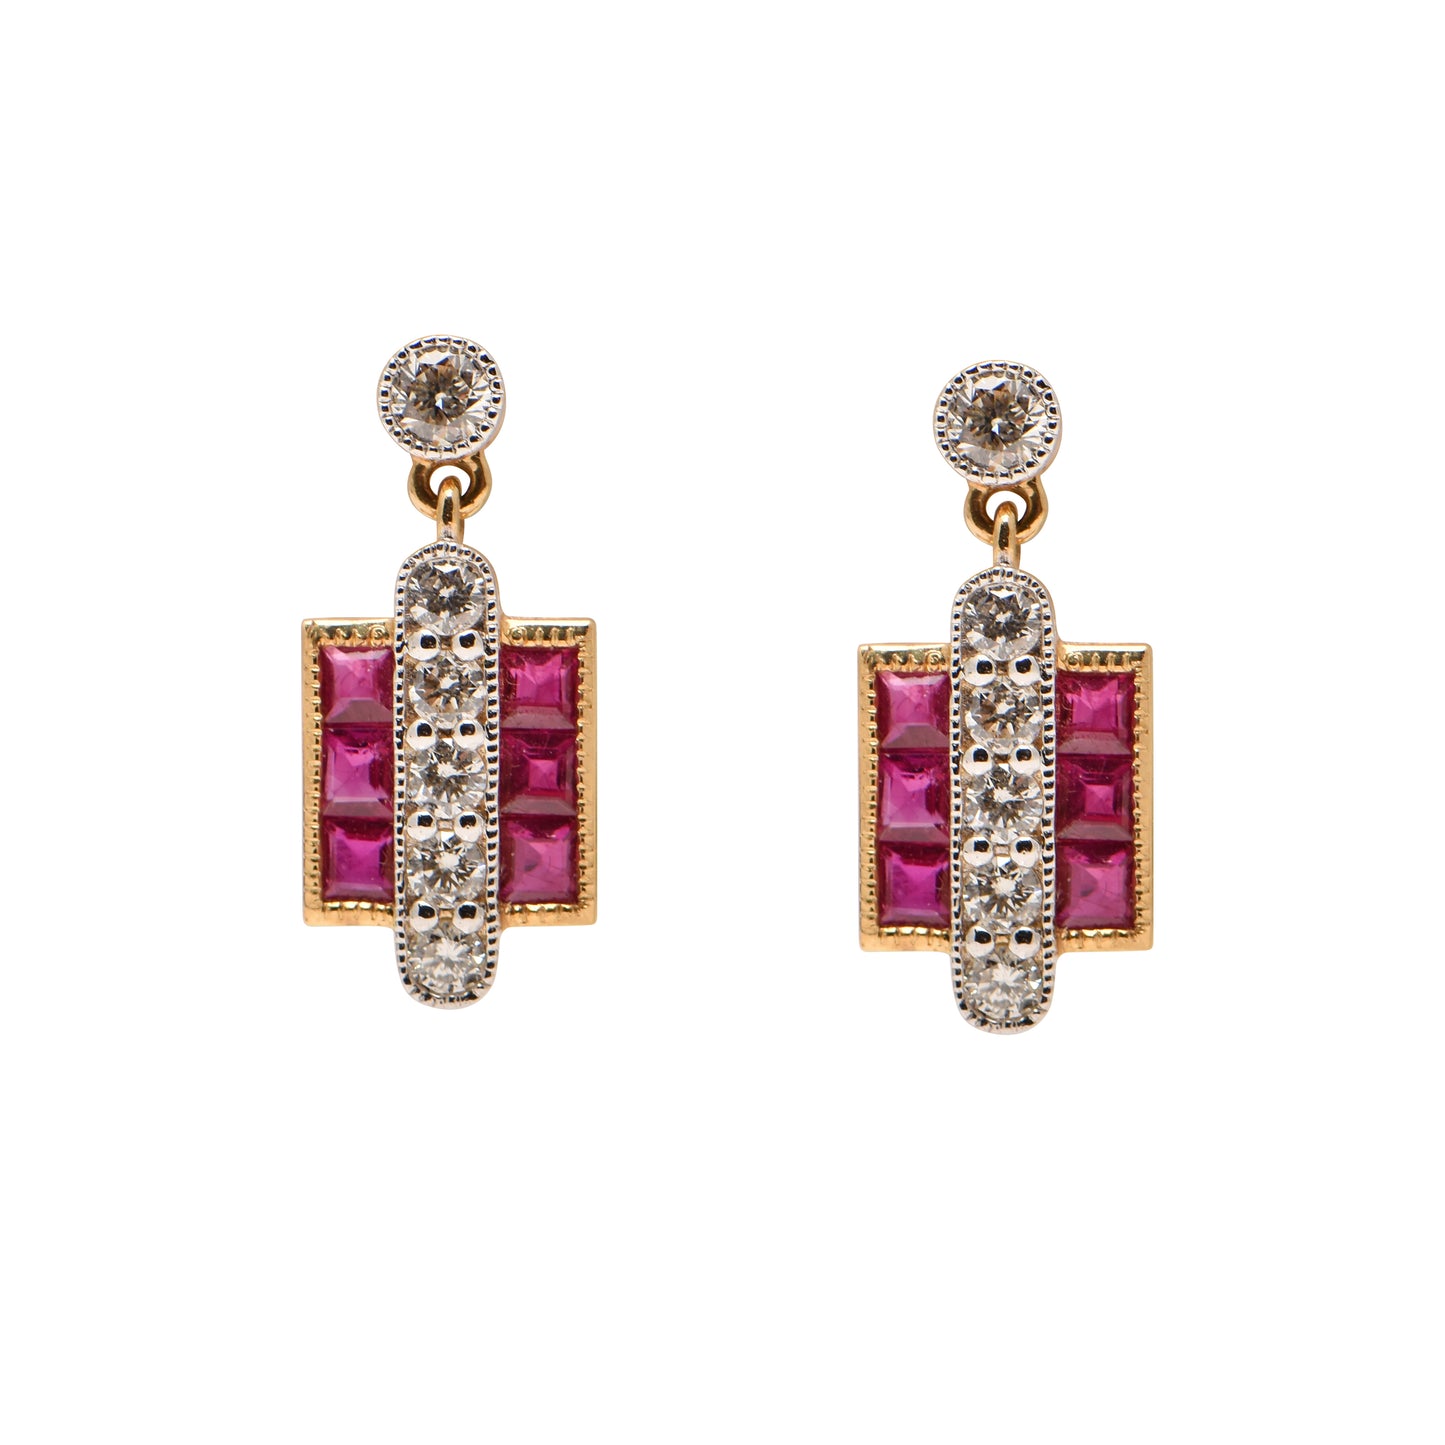 Ruby and Diamond Earrings in 18ct Gold